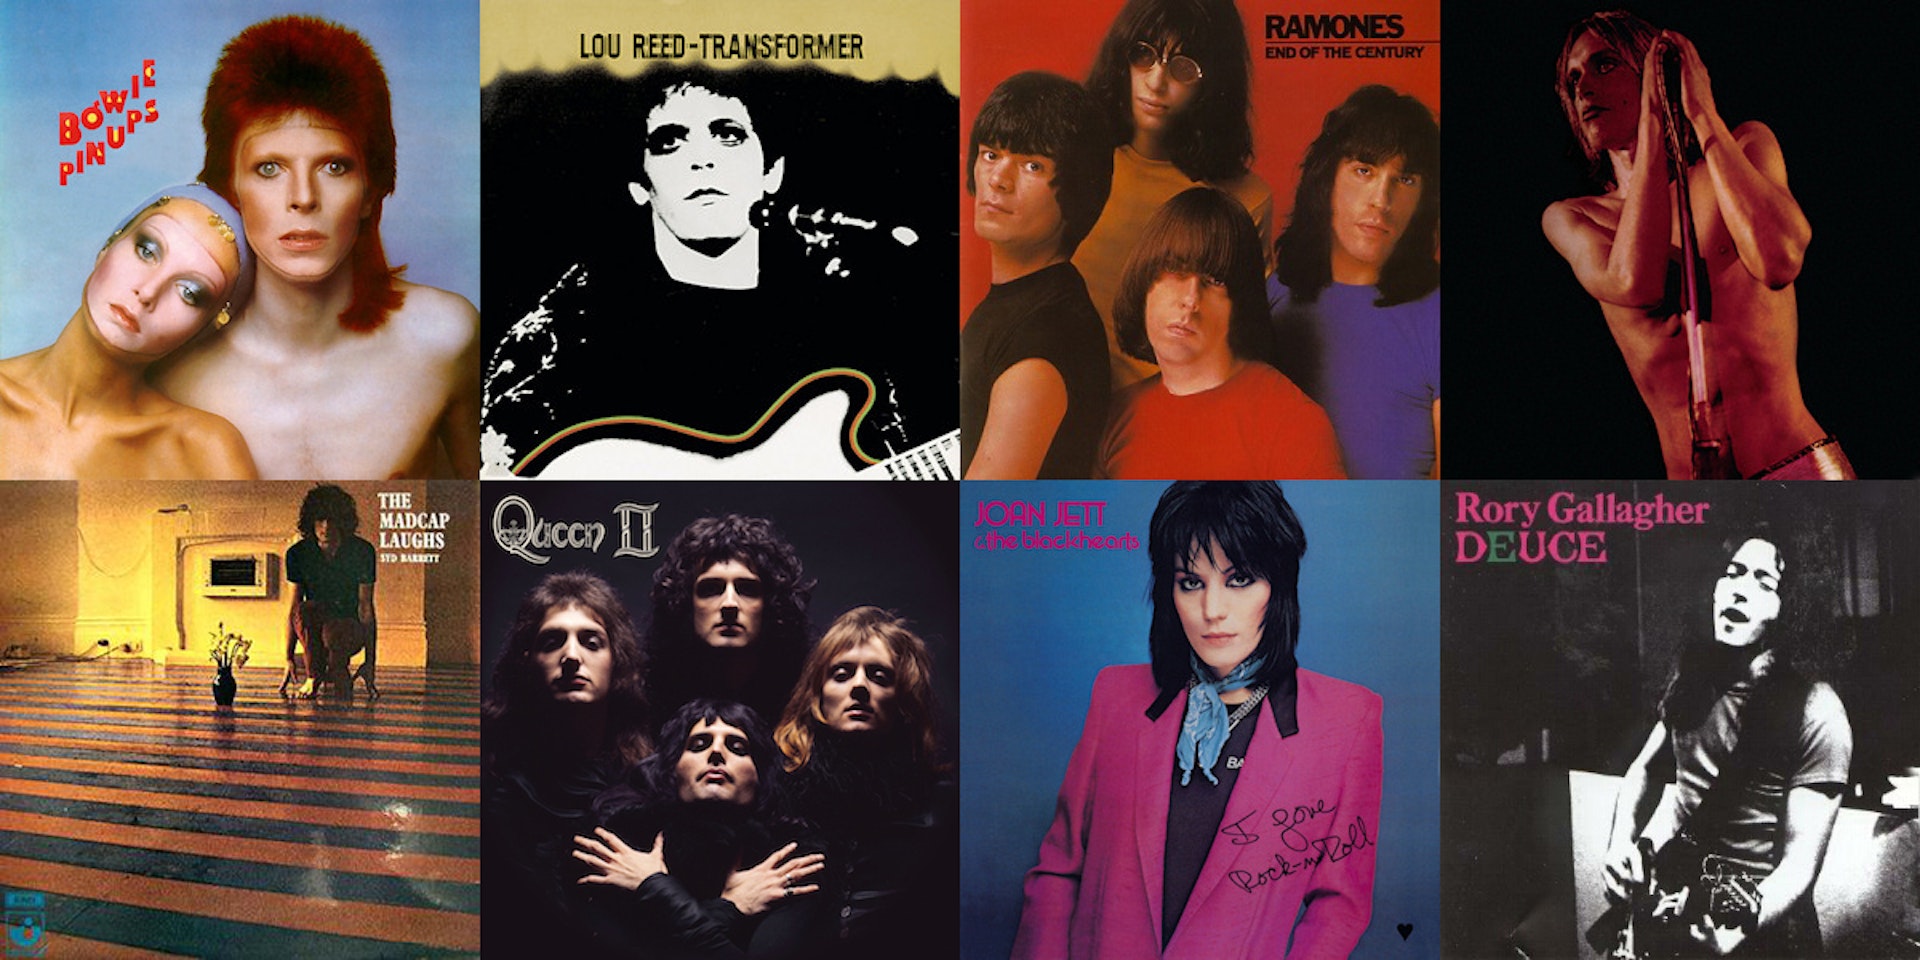 Just some of the album covers that Mick Rock has shot.